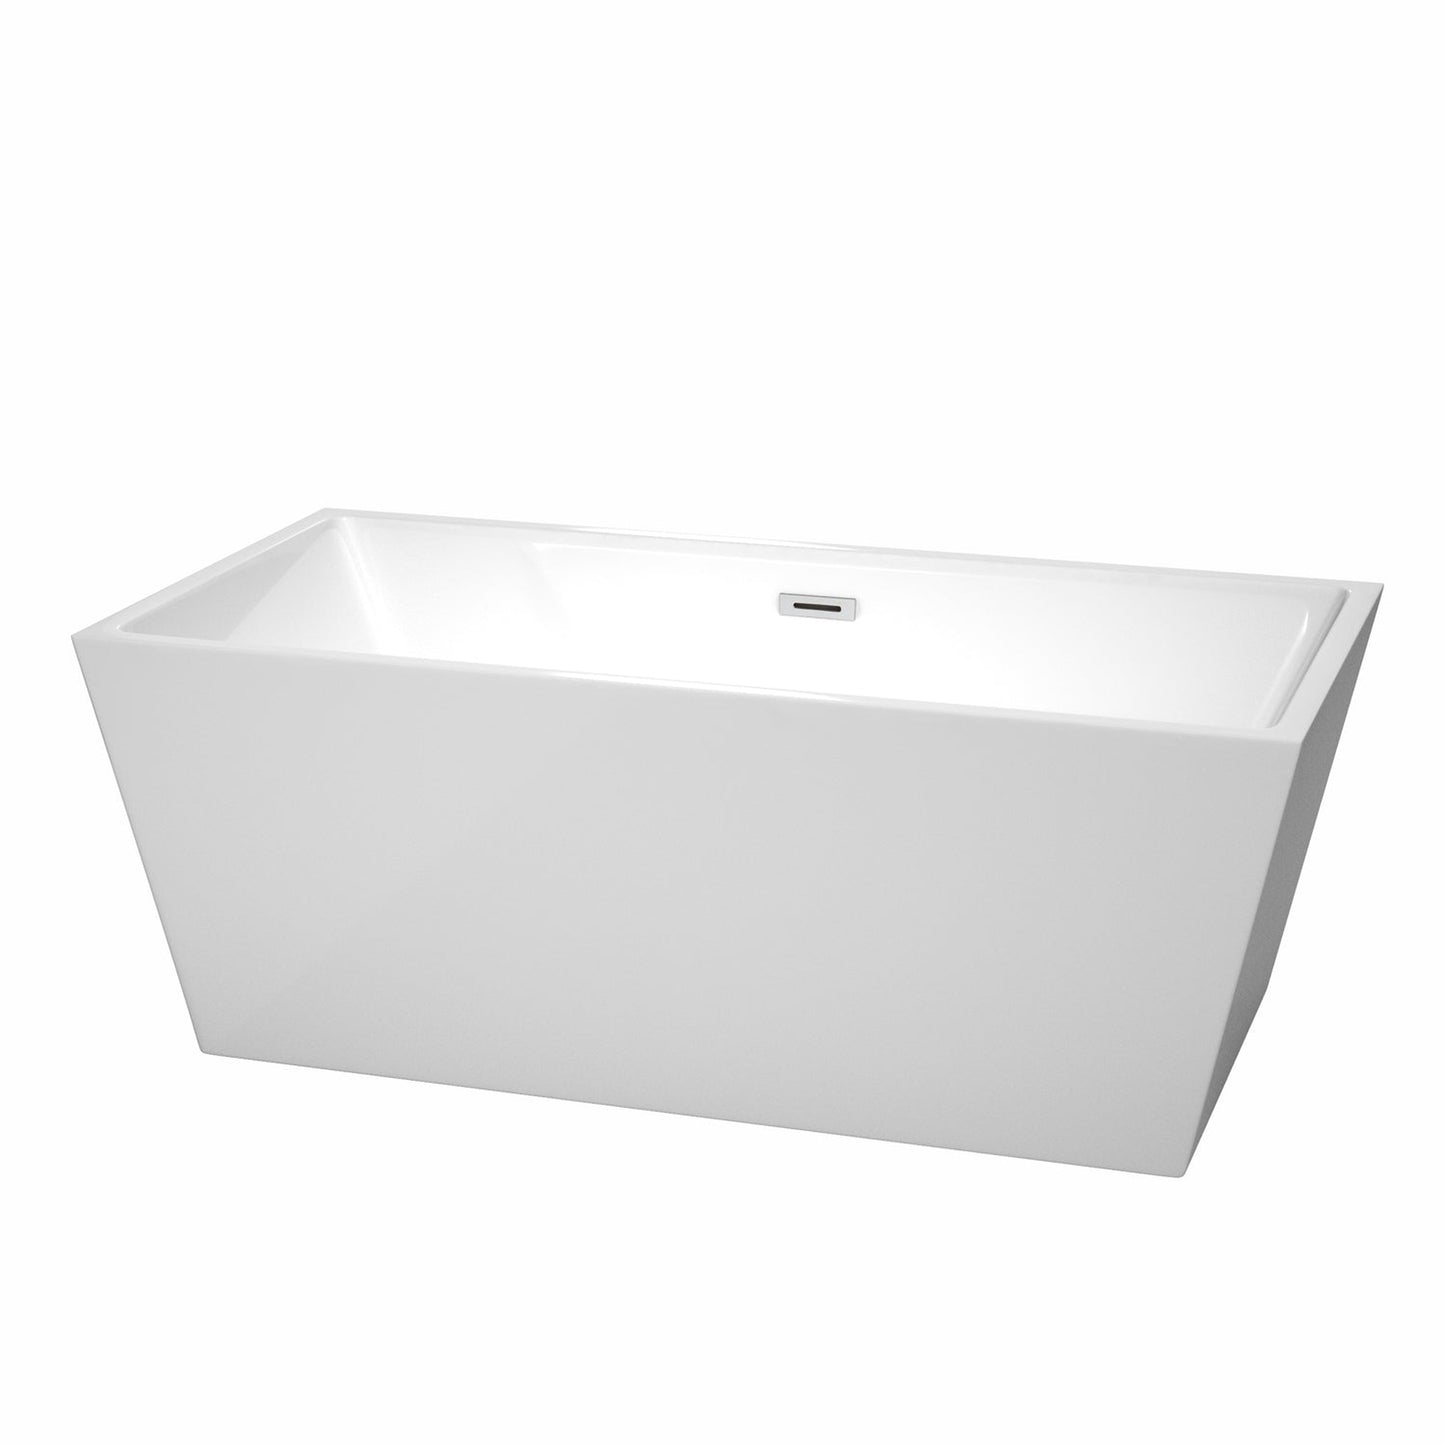 Wyndham Collection Sara 63" Freestanding Bathtub in White With Polished Chrome Drain and Overflow Trim